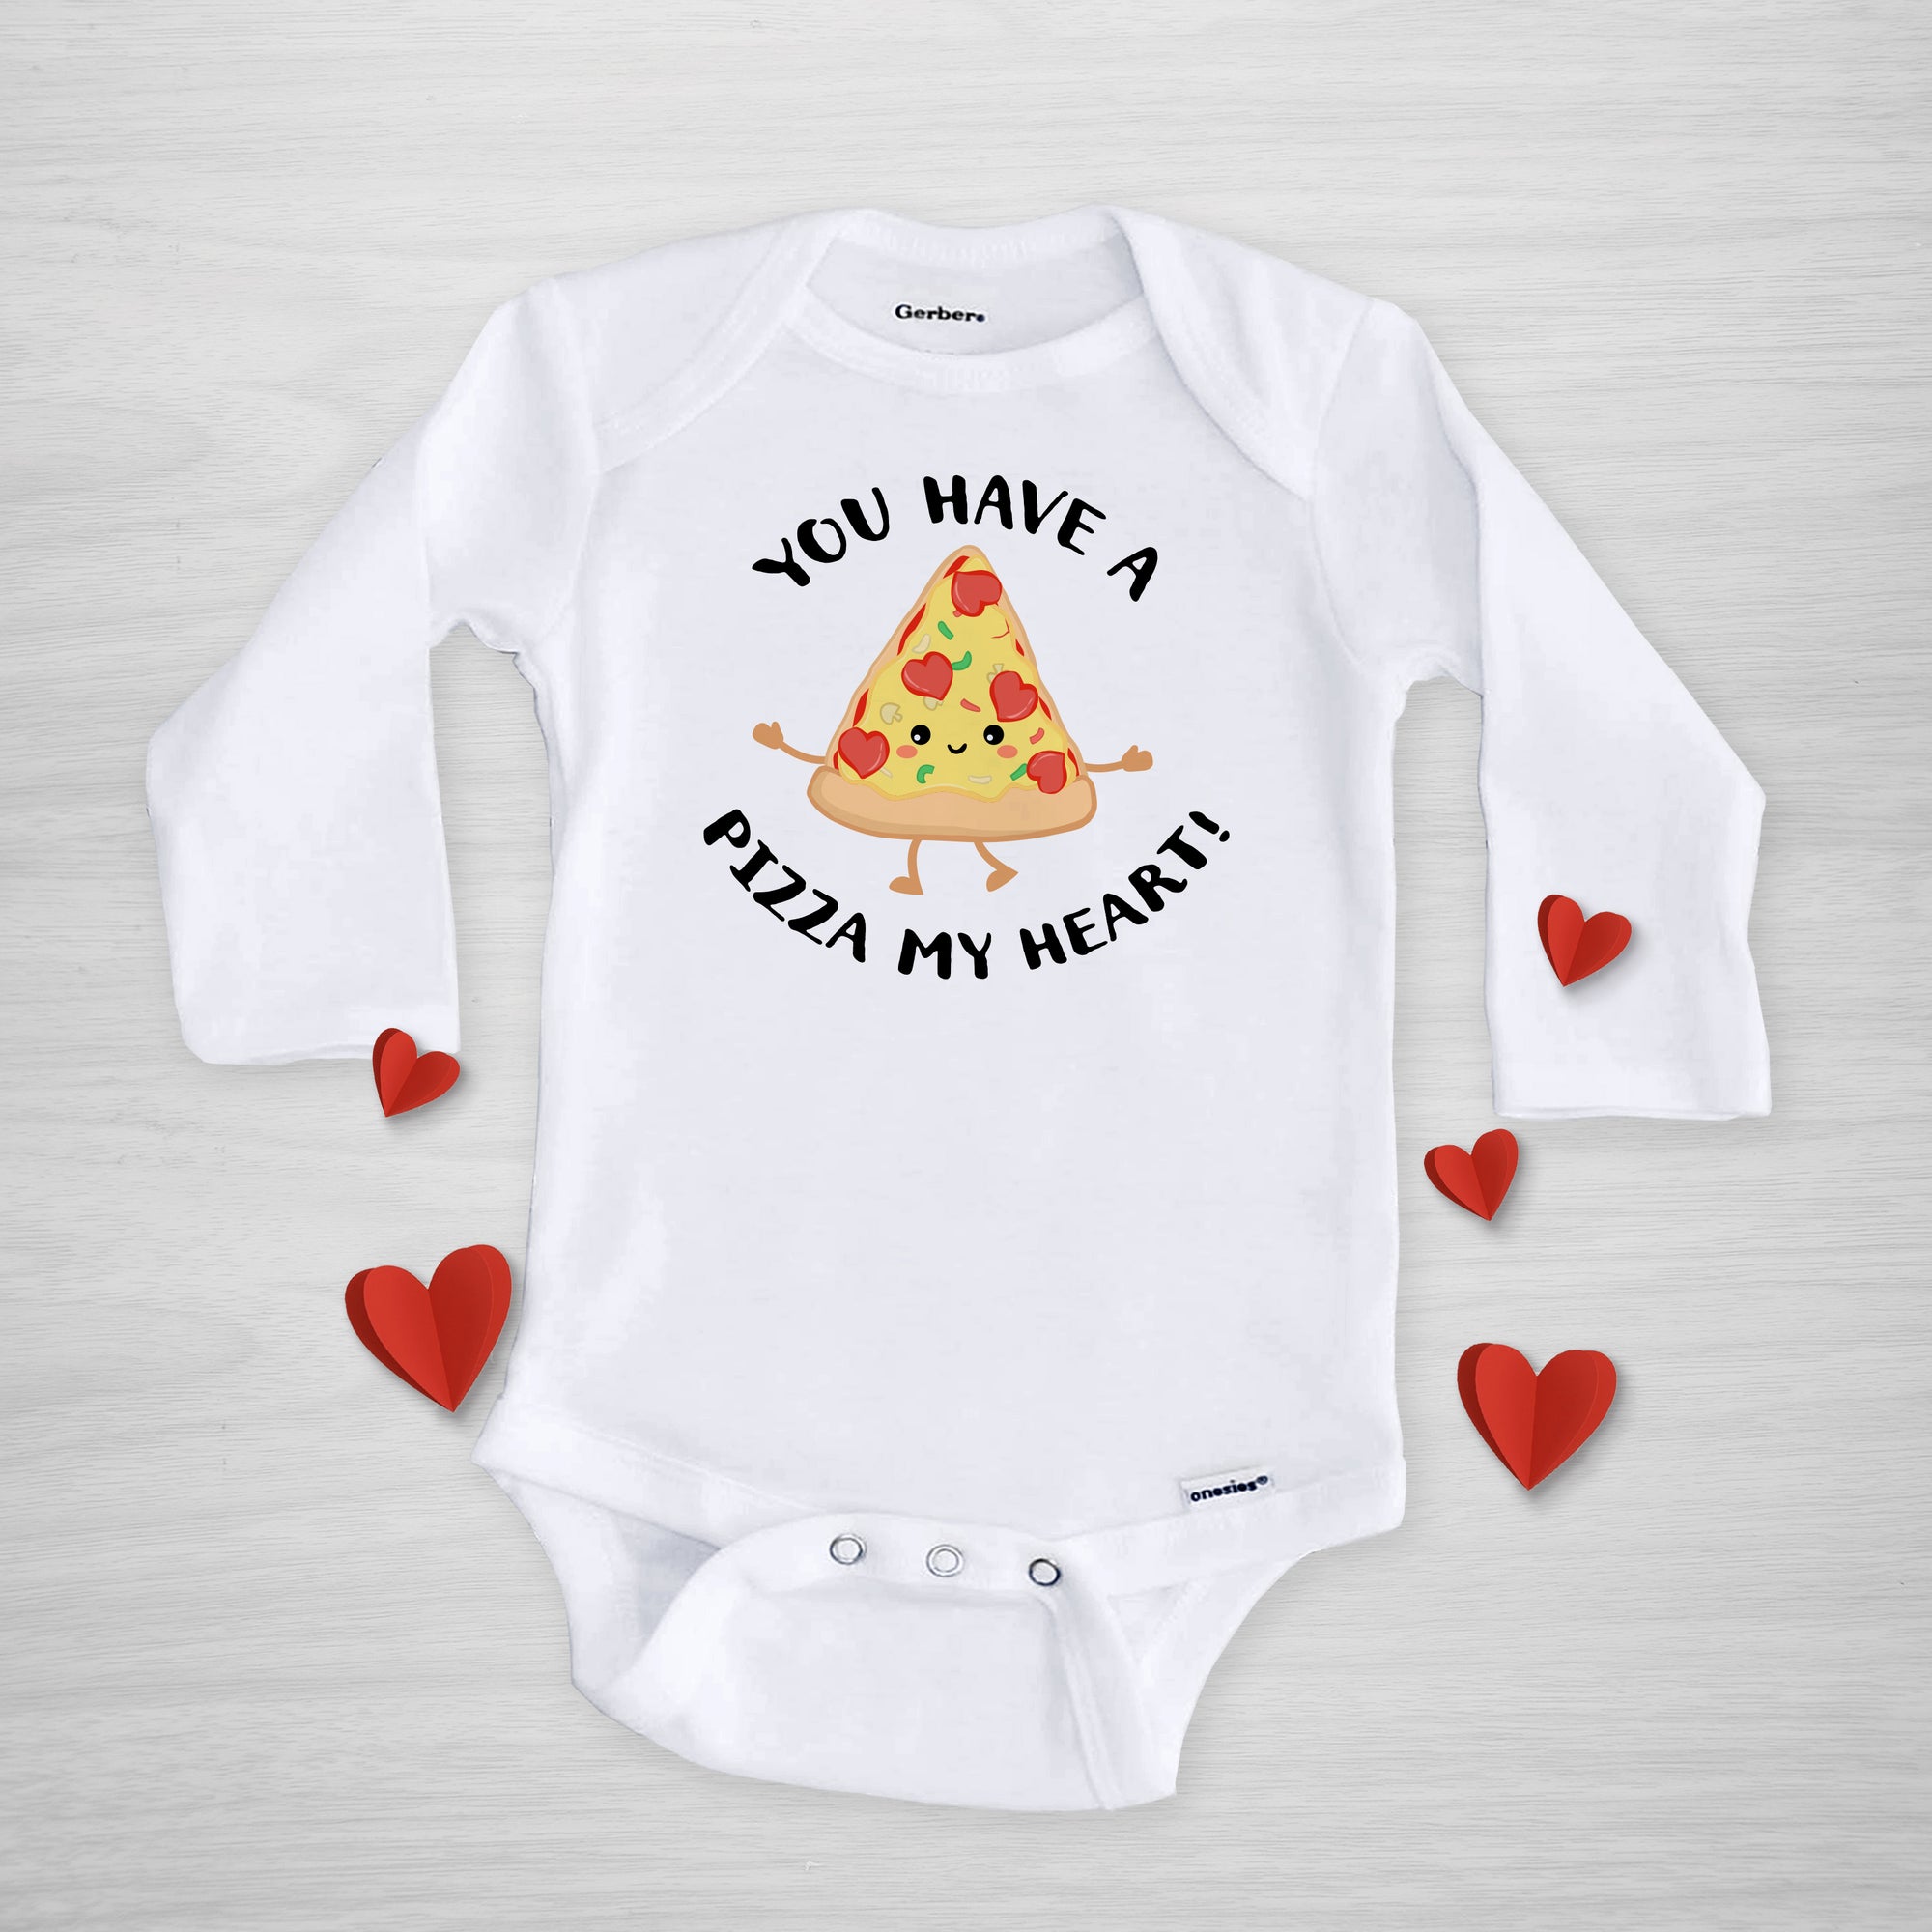 You have a PIZZA my heart Valentine's Day Gerber Onesie, Super soft print, Handmade in Nashville by pipsy, long sleeved